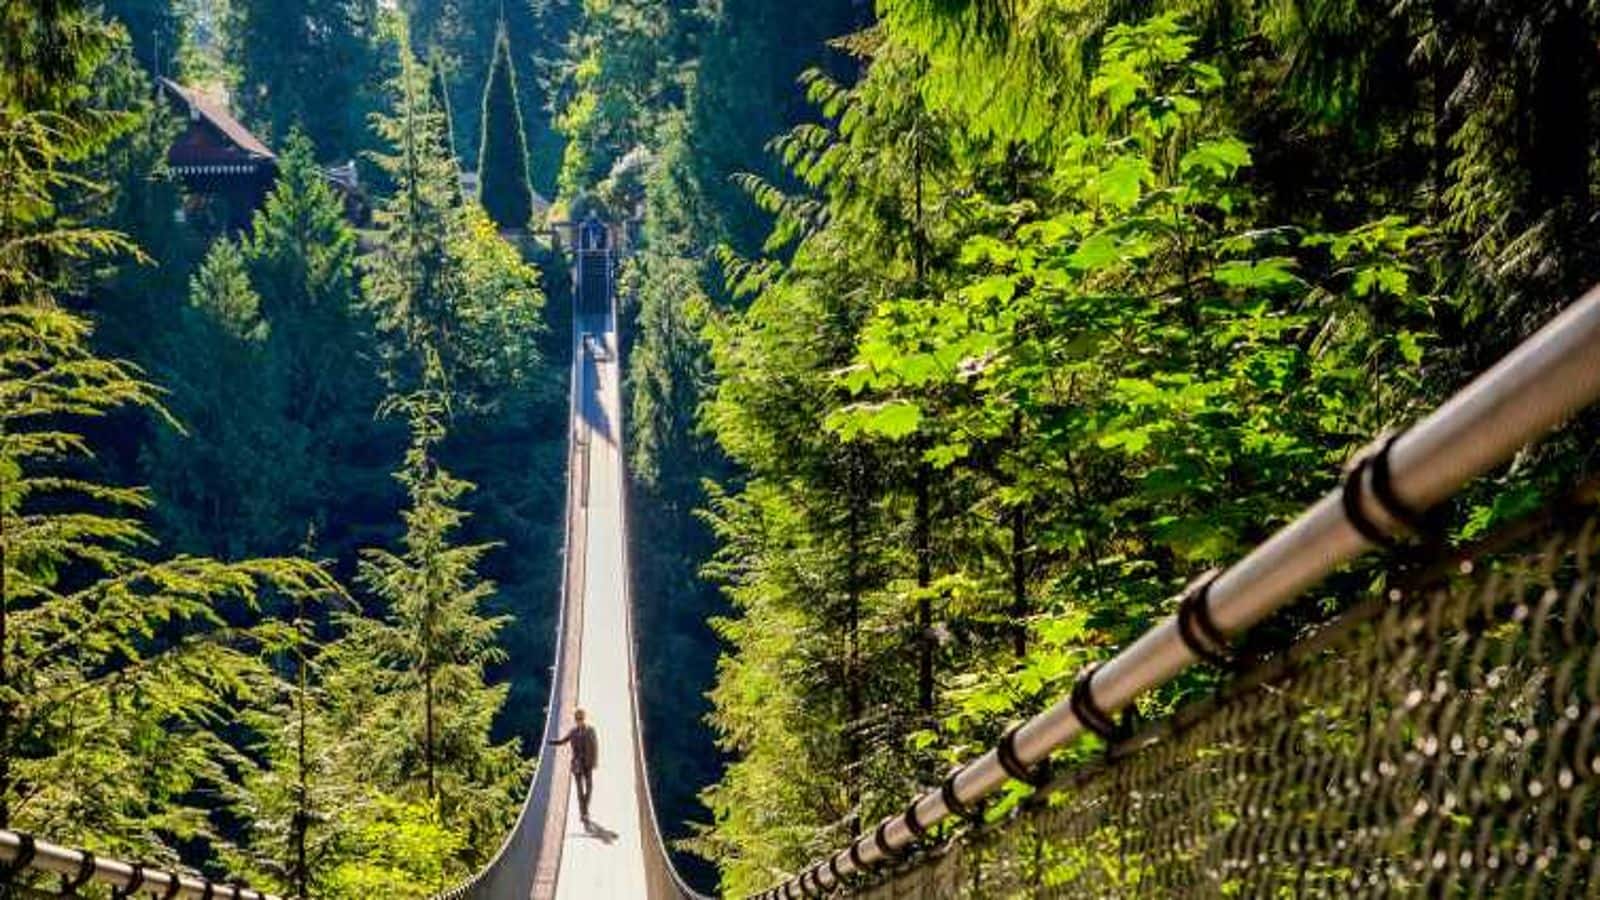 Vancouver's rainforest escapes are perfect for nature lovers